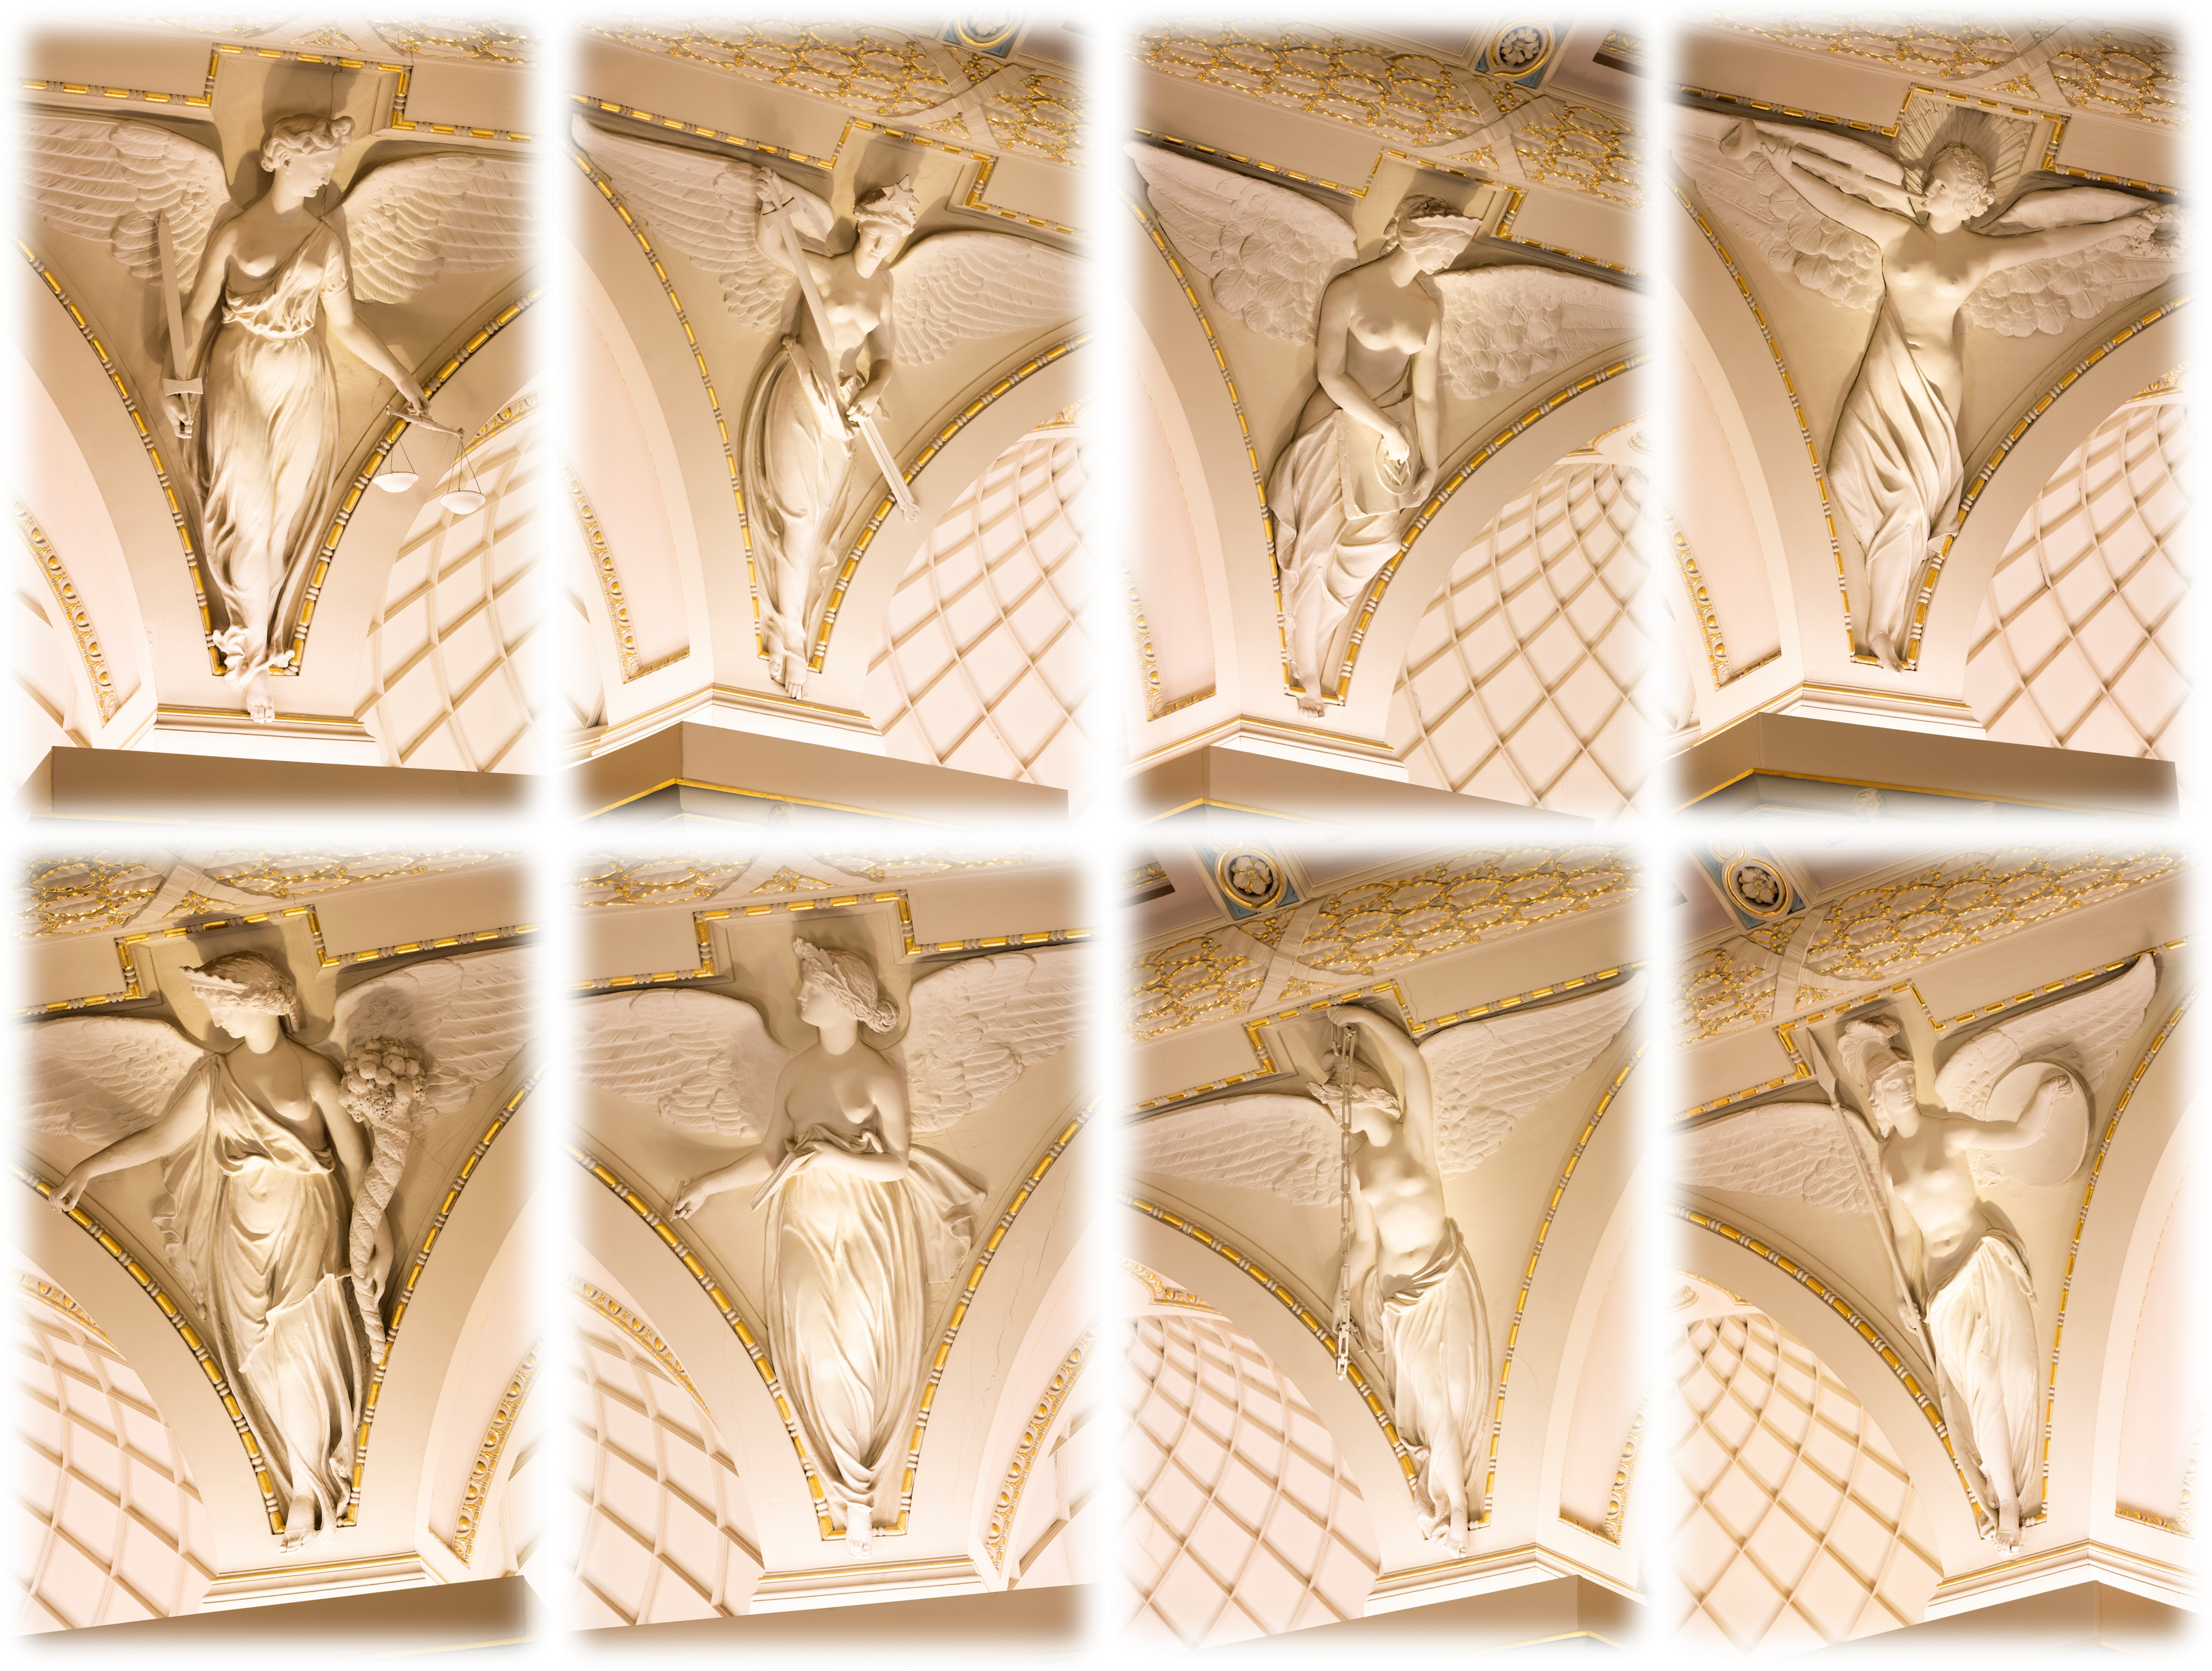 Shown clockwise from top left: Justice, Mercy, Architecture, Fame, Wisdom, Unity, History, Plenty.